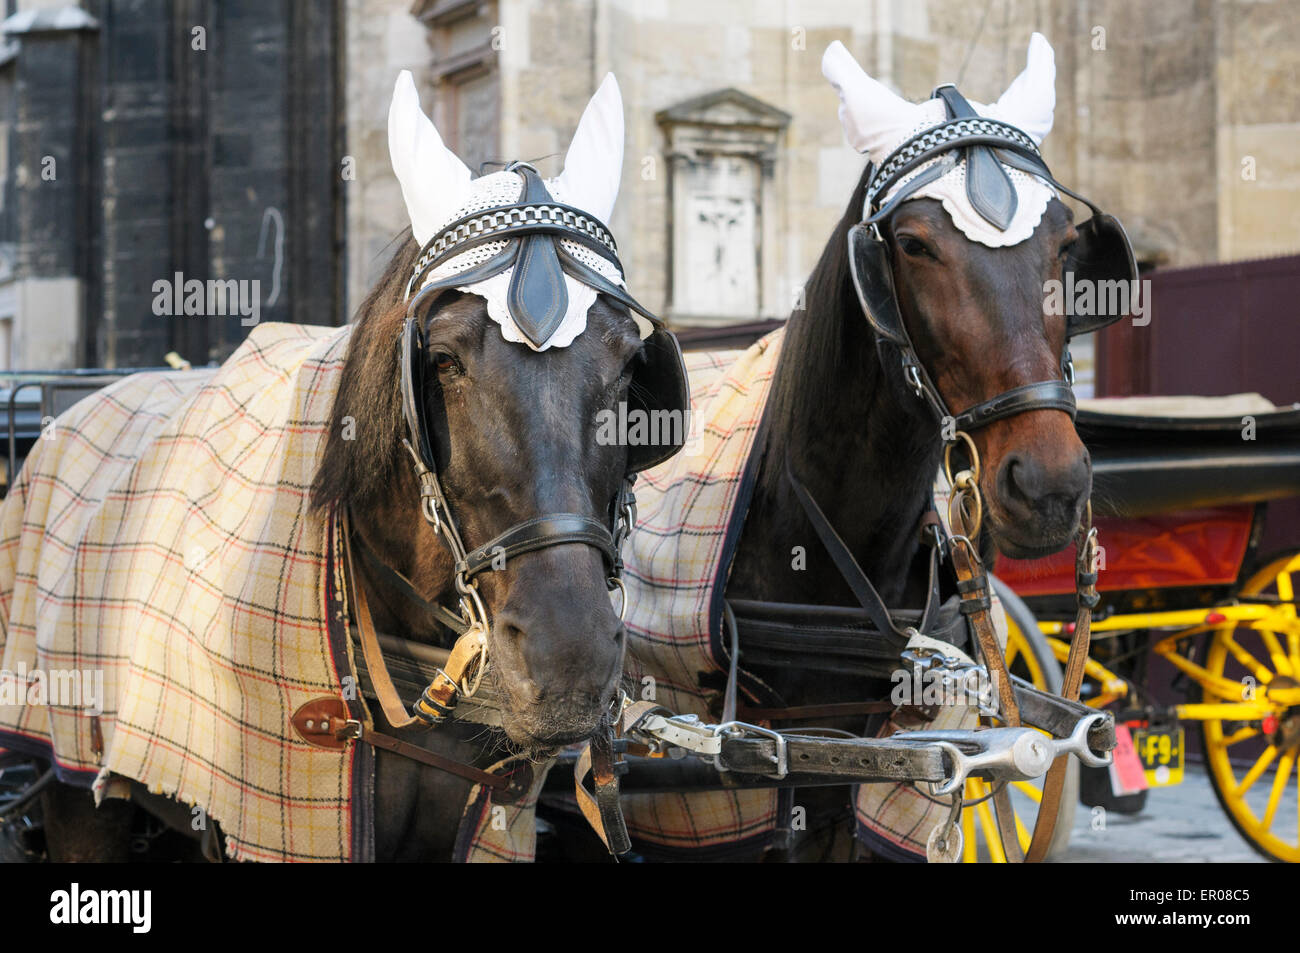 Ear covers adorn the horses used to transport tourists in a fiaker around the old city of Vienna, Austria. Stock Photo